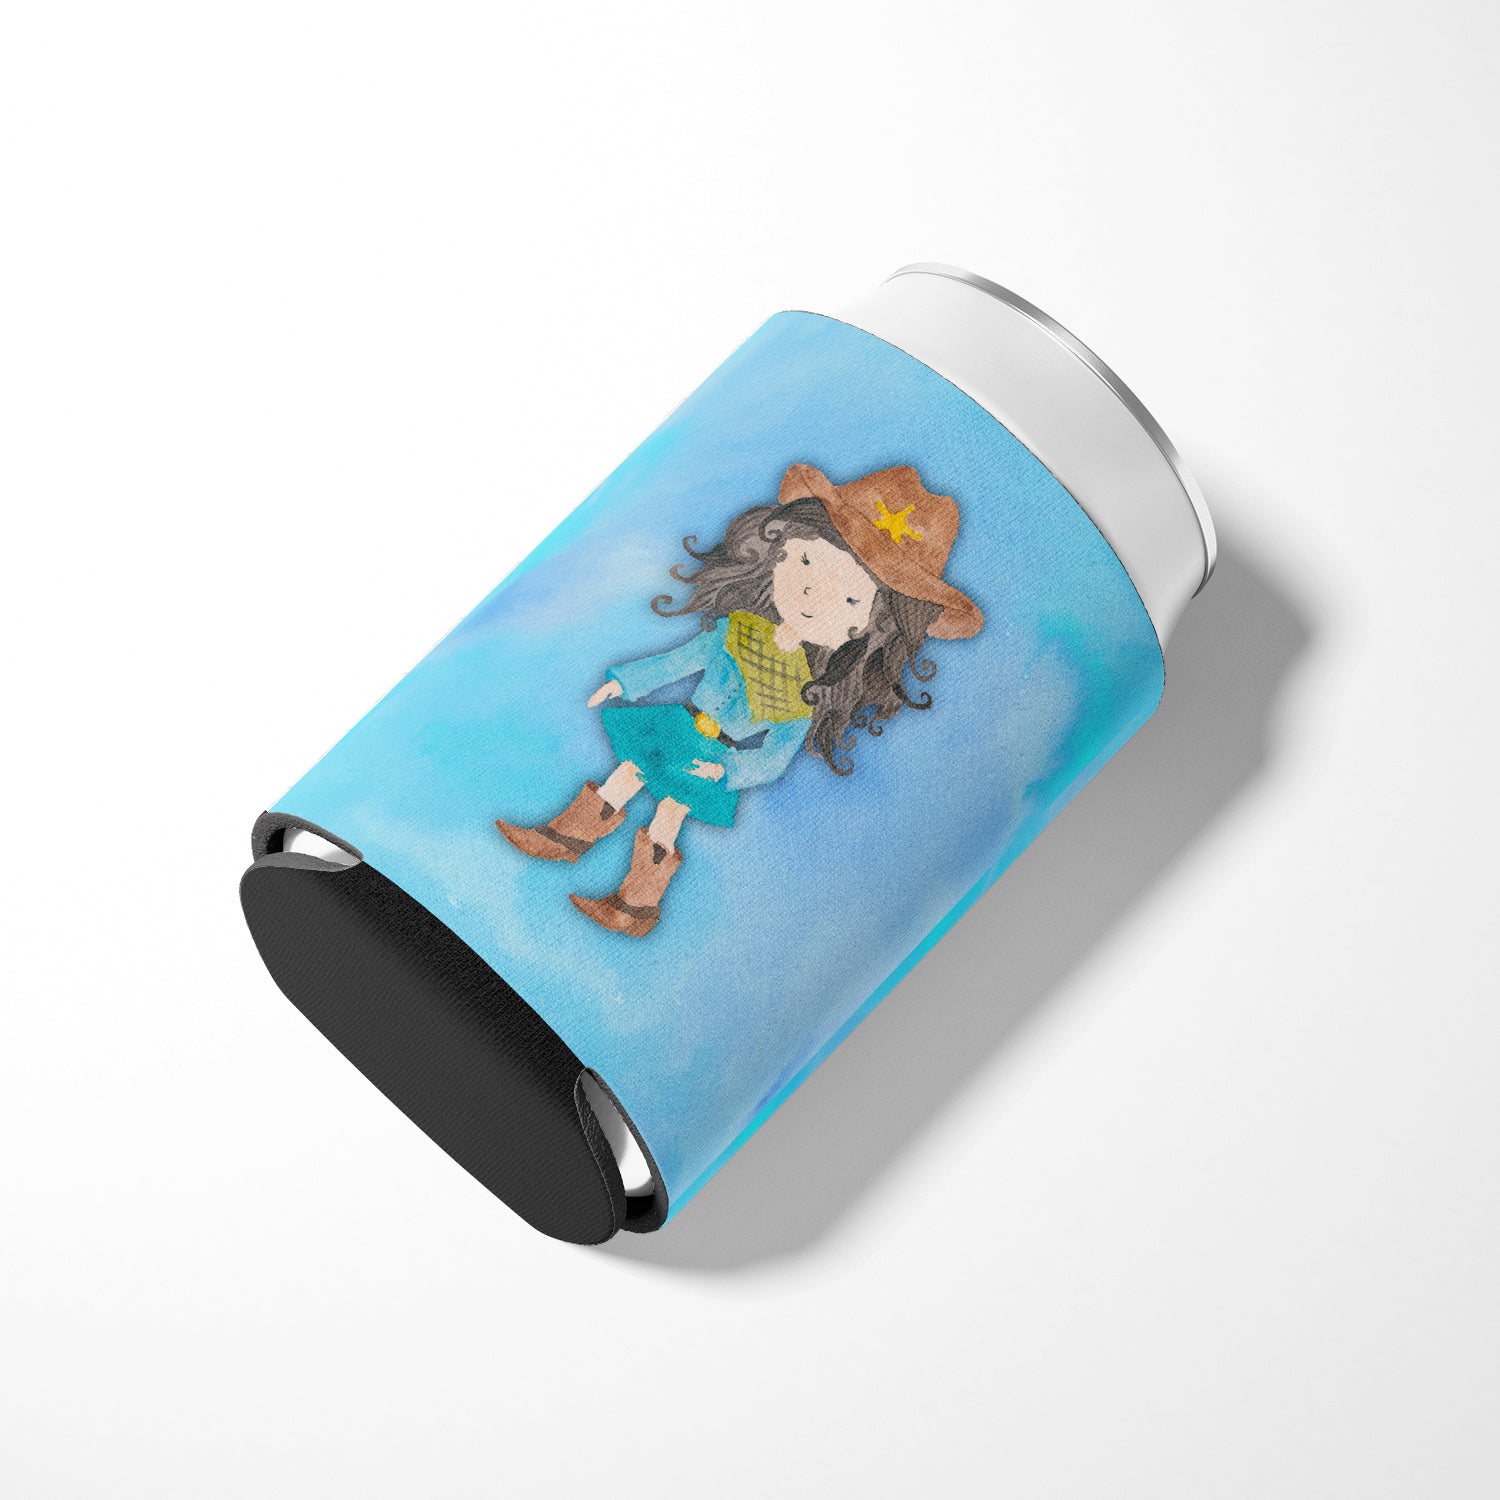 Cowgirl Watercolor Can or Bottle Hugger BB7367CC